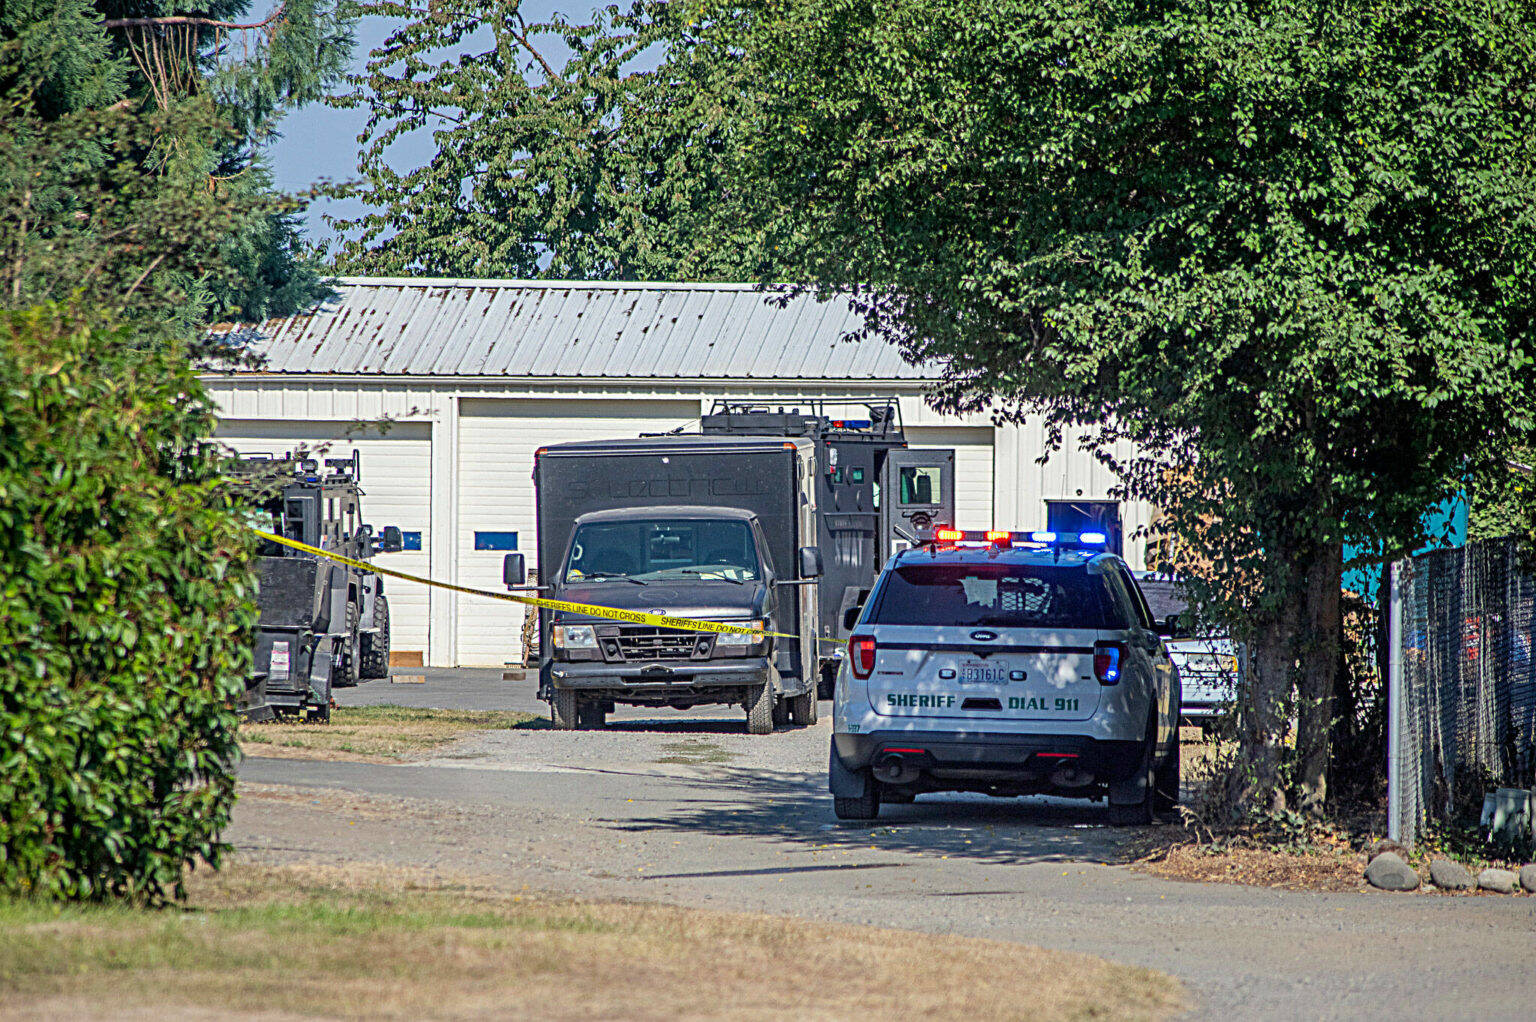 Sequim Gazette file photo by Emily Matthiessen
Members of the Kitsap Critical Incident Response Team (KCIRT) investigate an active shooter situation off Priest Lane on Sept. 22 that resulted in the shooter’s death. He was later identified as 49-year-old Terris Vincent Hetland.